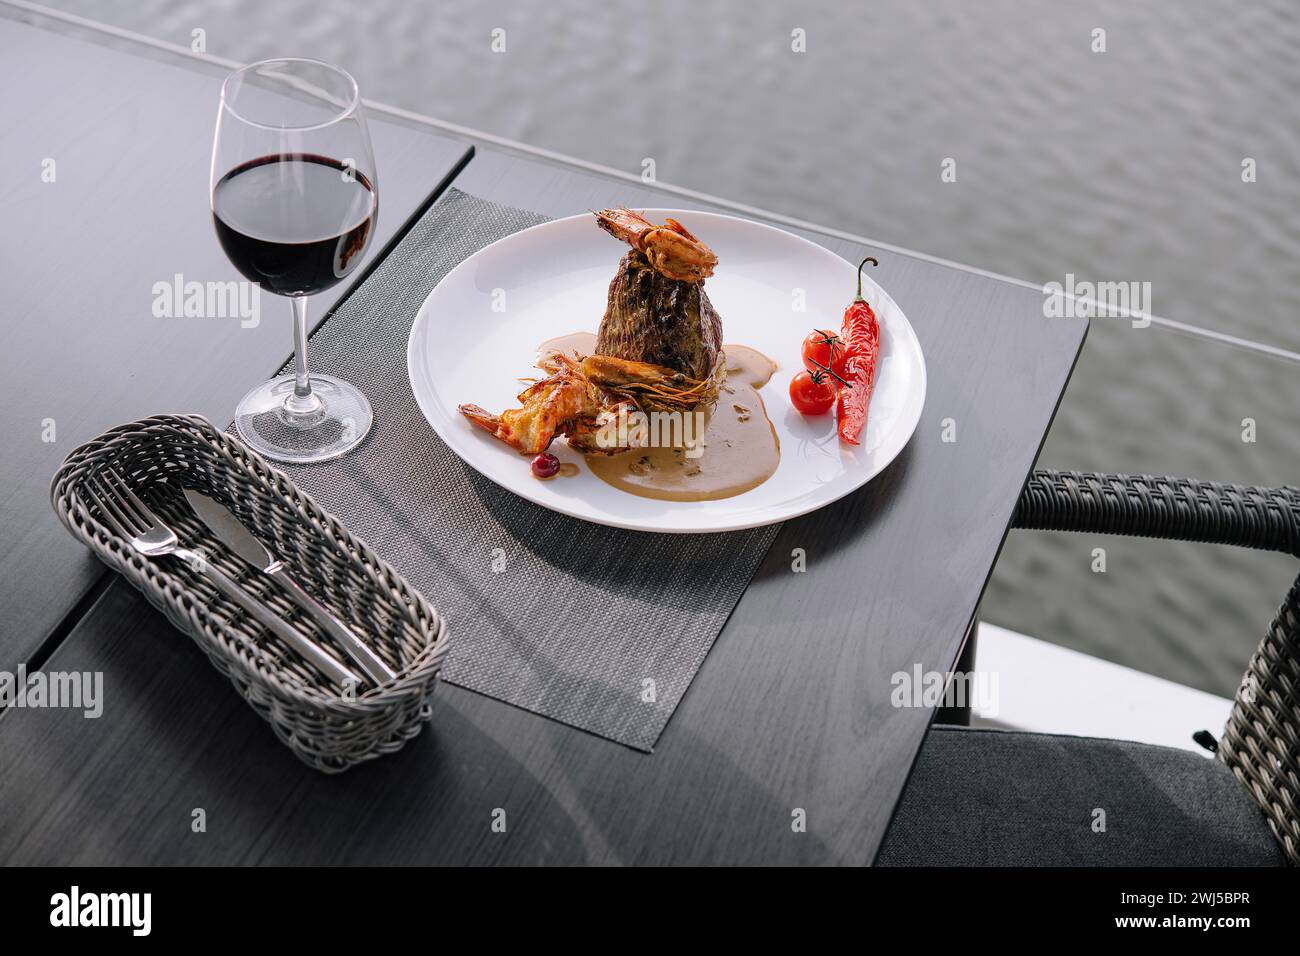 A delicious shrimp scampi dish with red wine Stock Photo